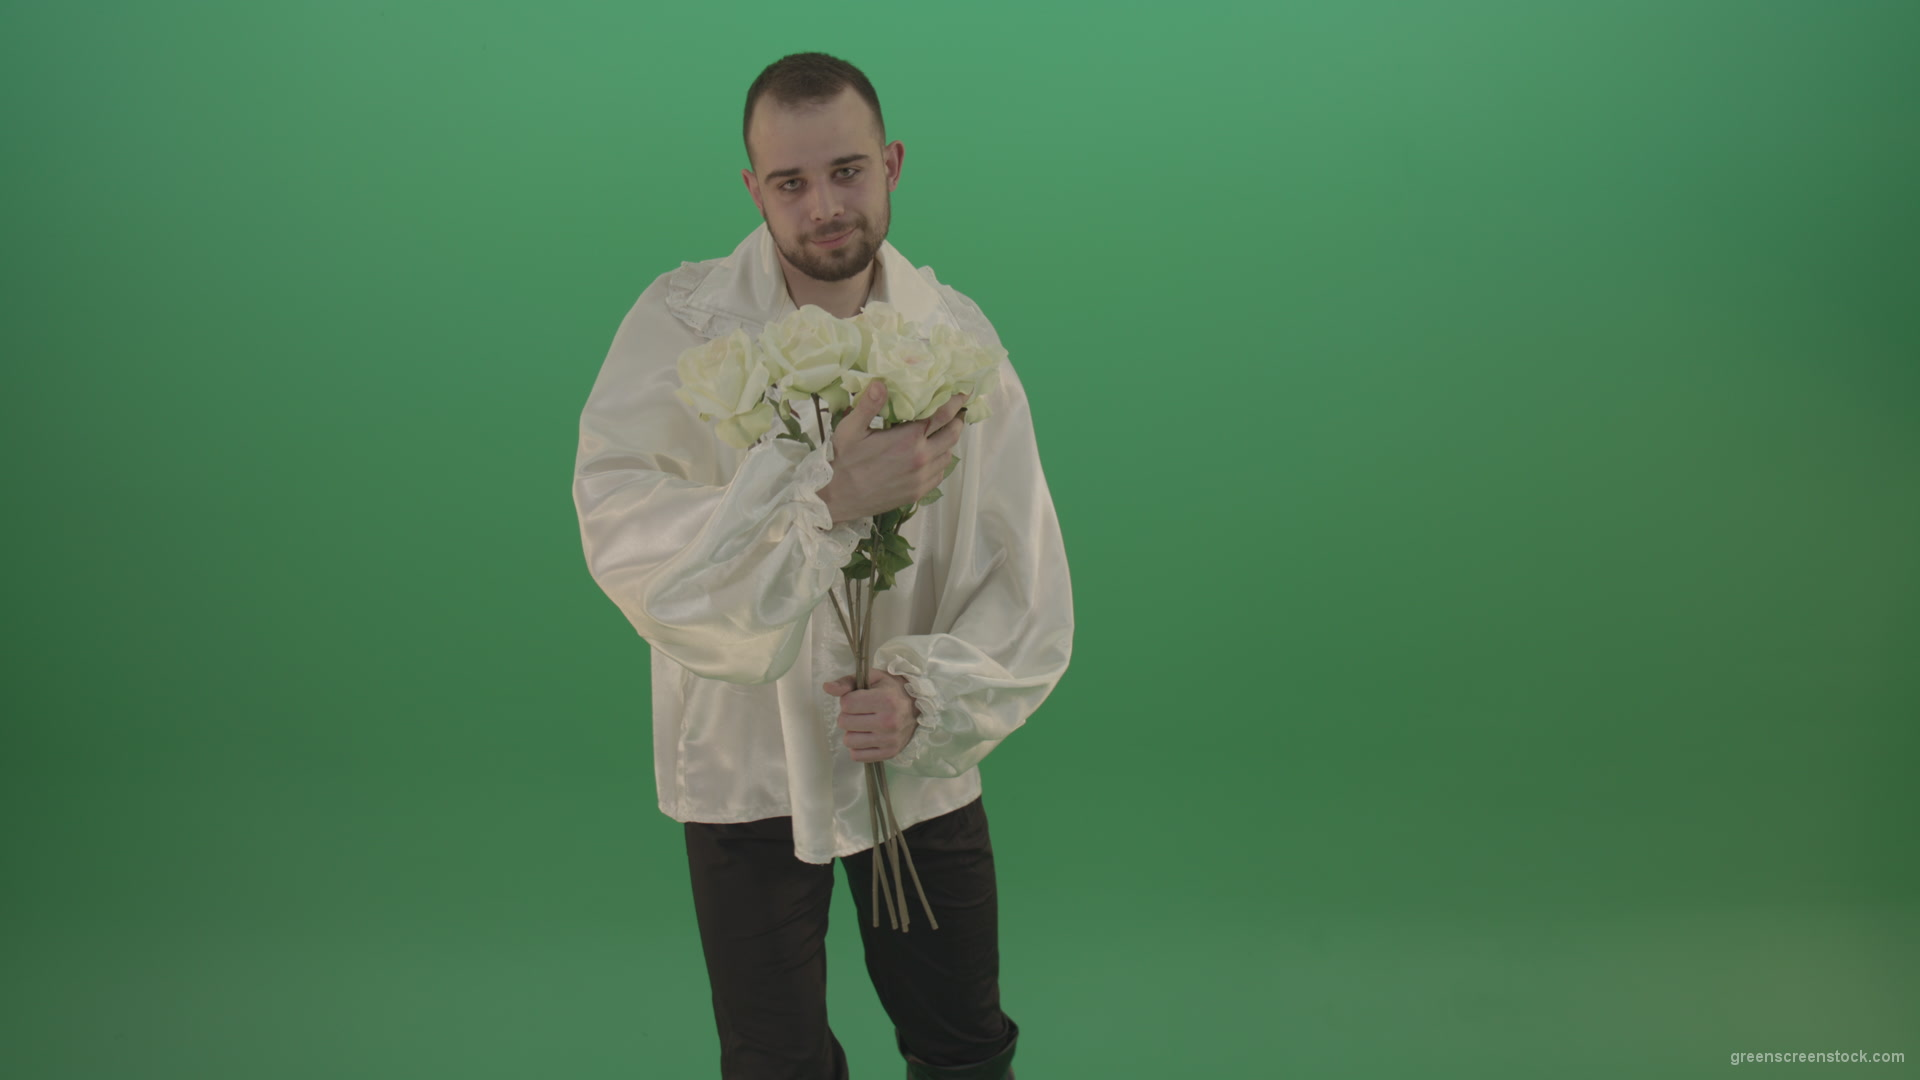 Middle-Age-theater-actor-boy-give-to-camera-White-flowers-isolated-on-green-background_006 Green Screen Stock